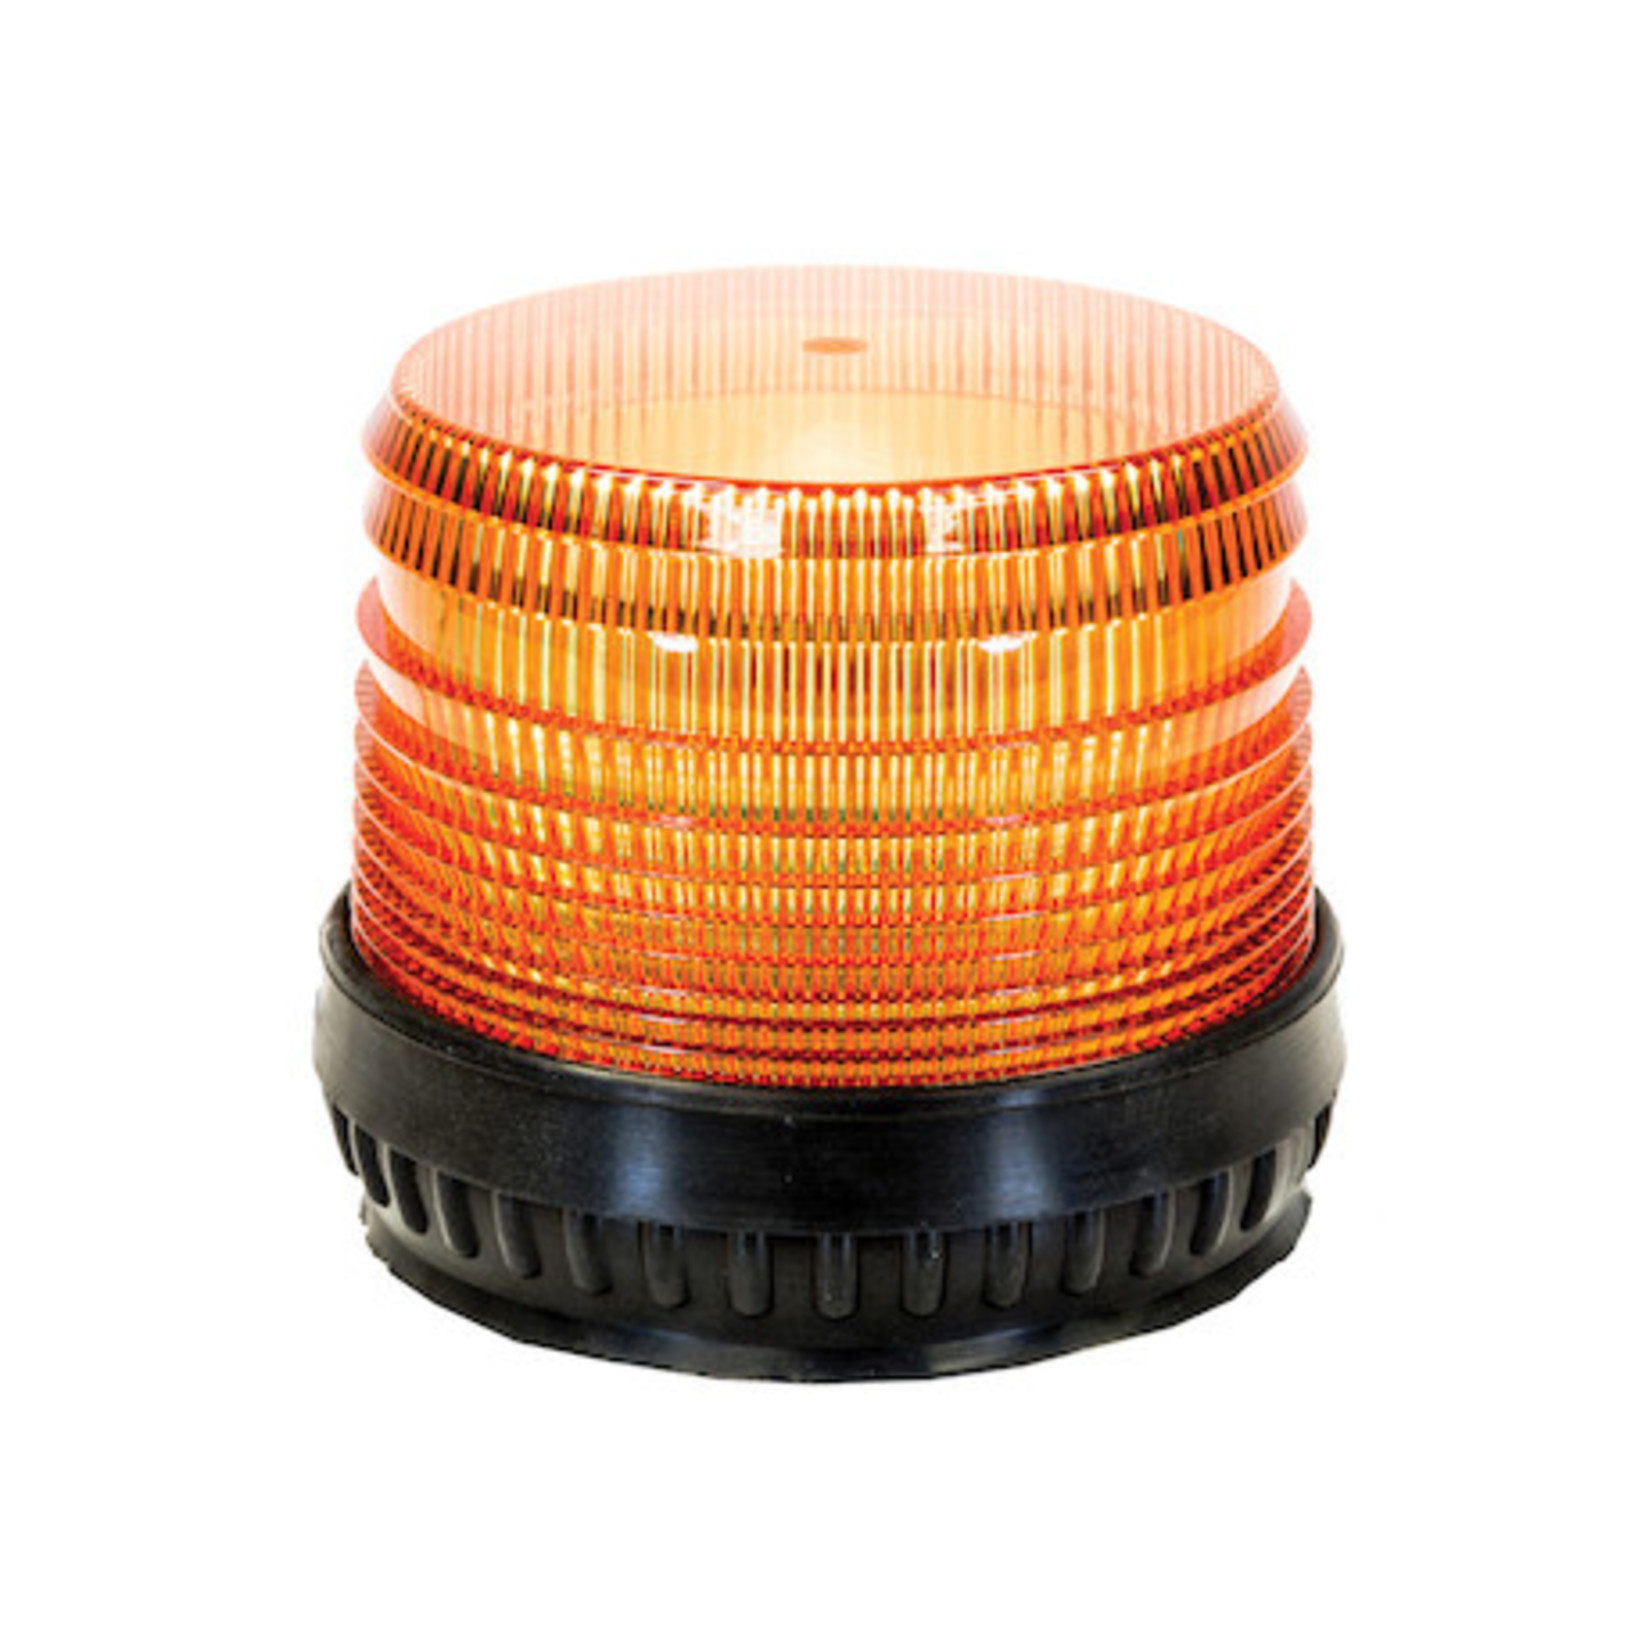 Buyers Products Company 5 Inch Wide Incandescent Beacon